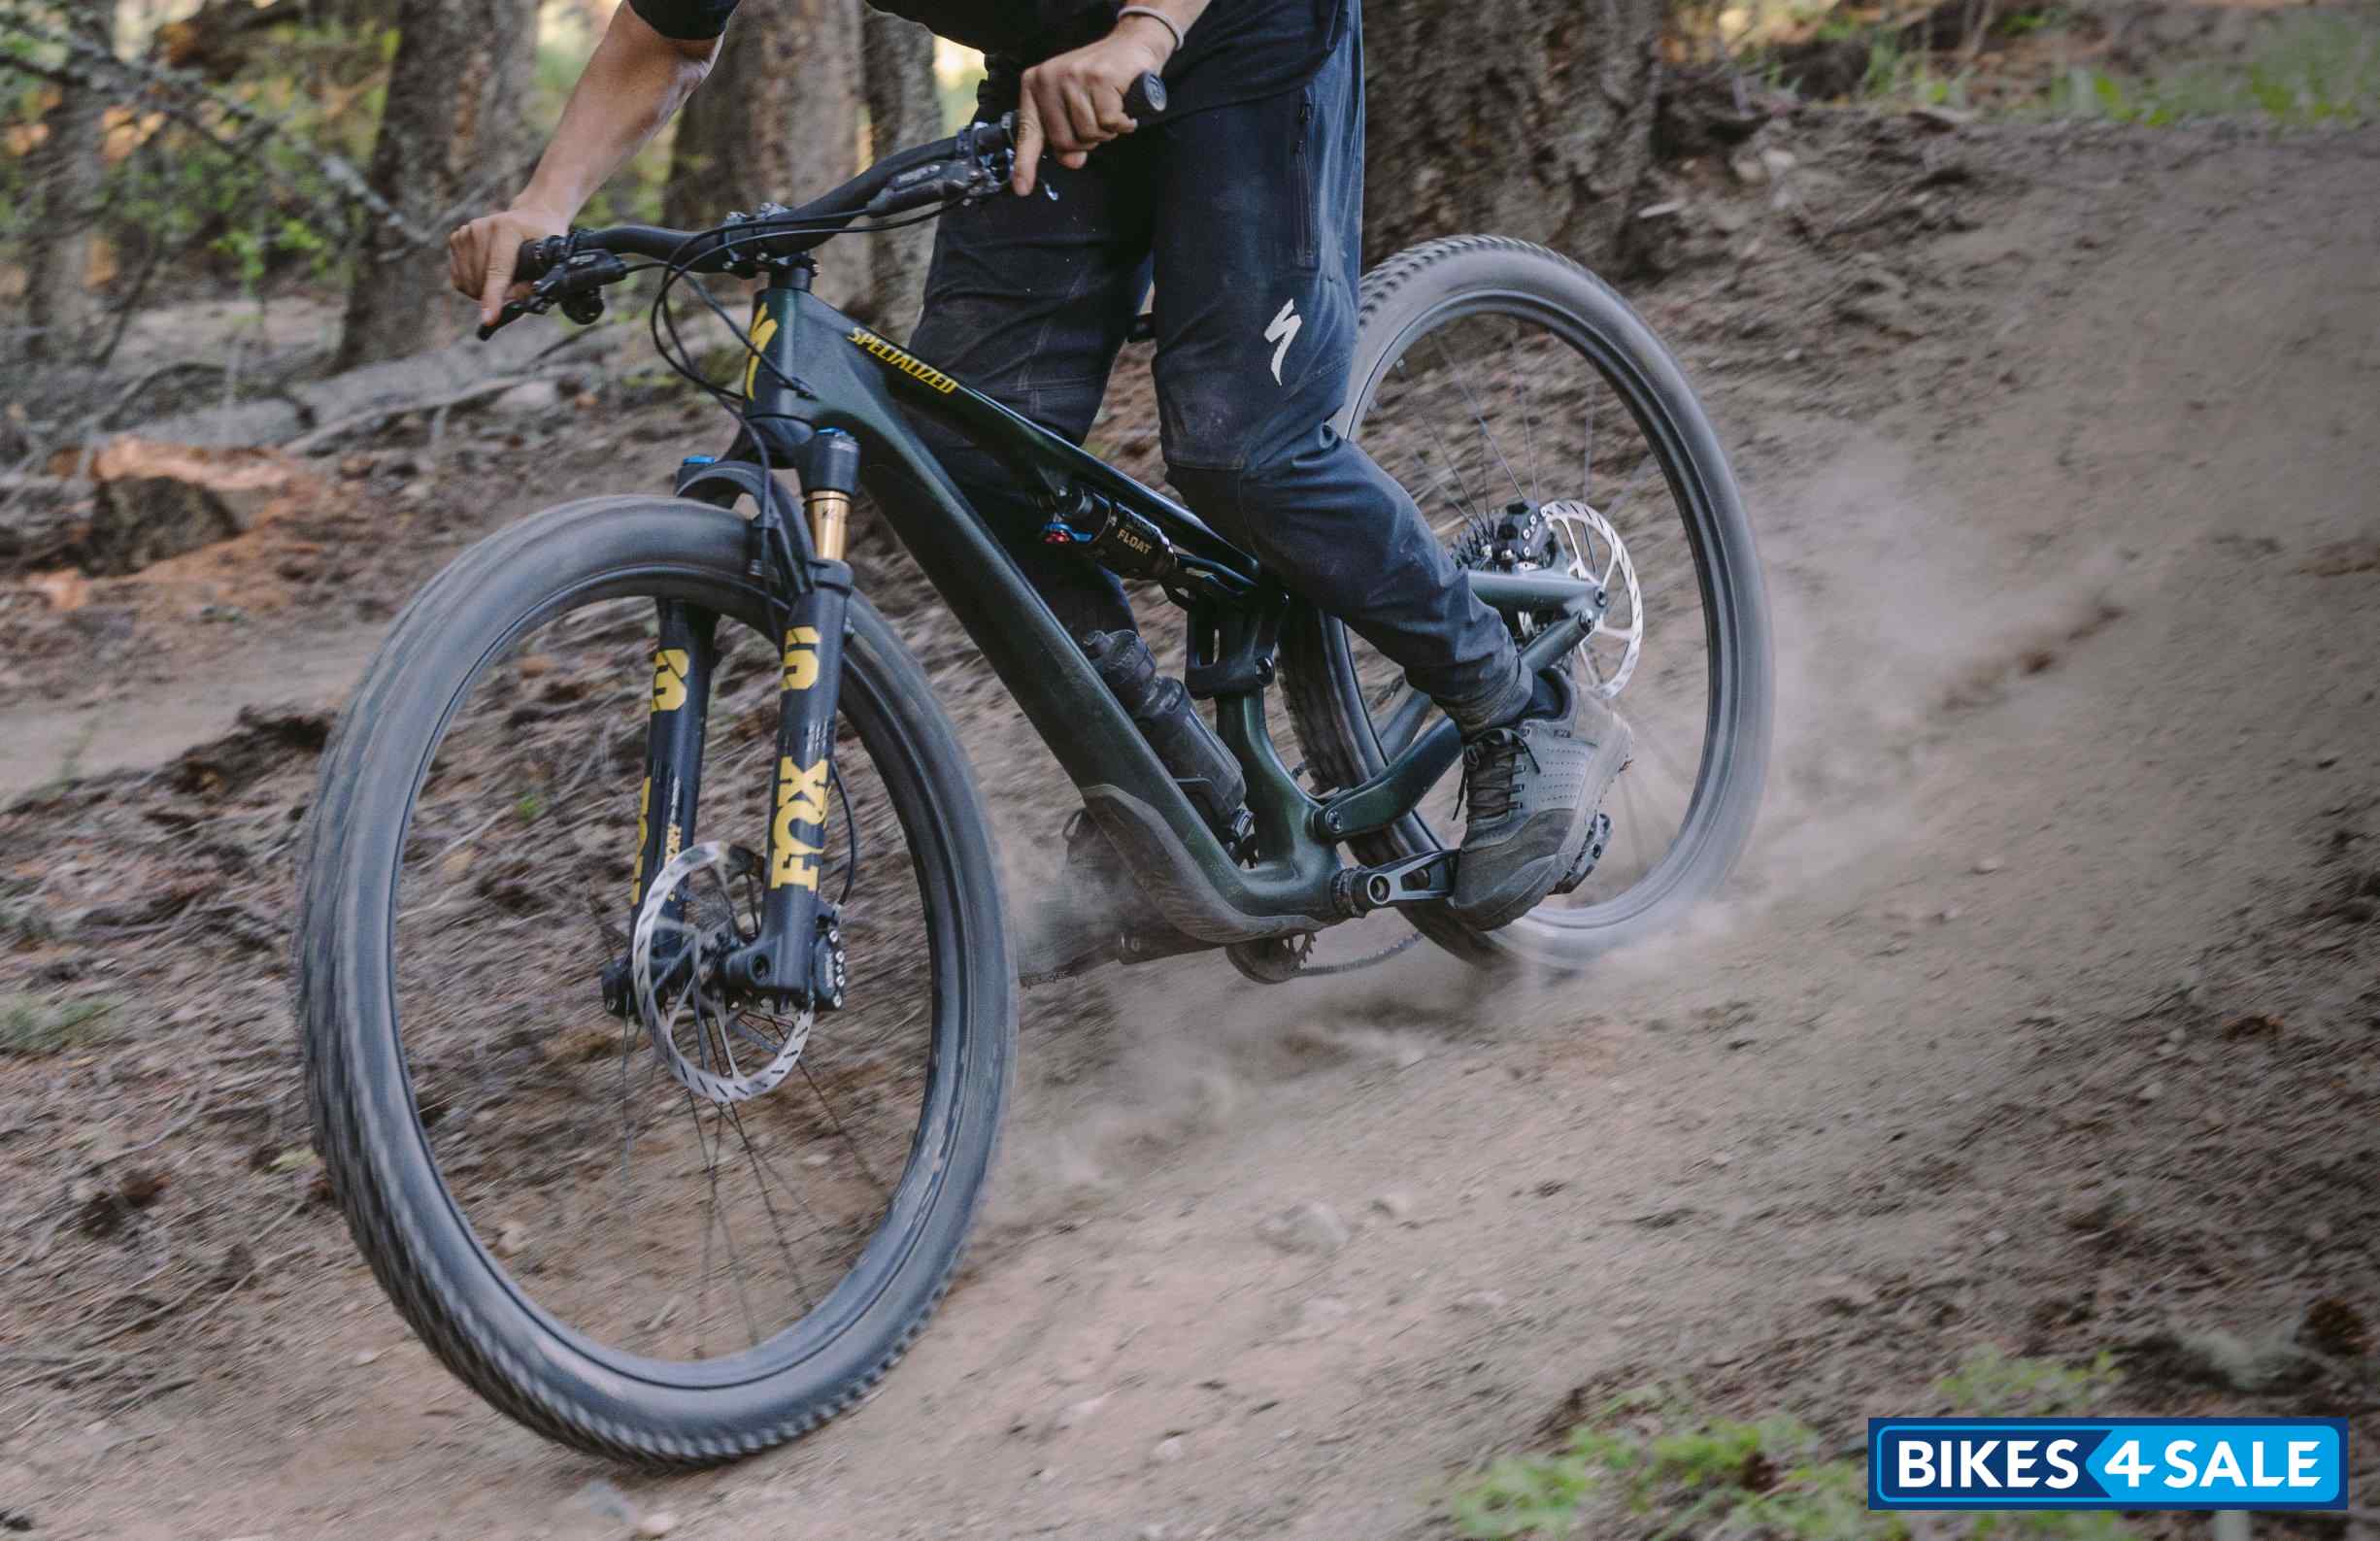 Specialized Introduces The All New Stumpjumper 15 With Advanced Suspension And Customizable Features